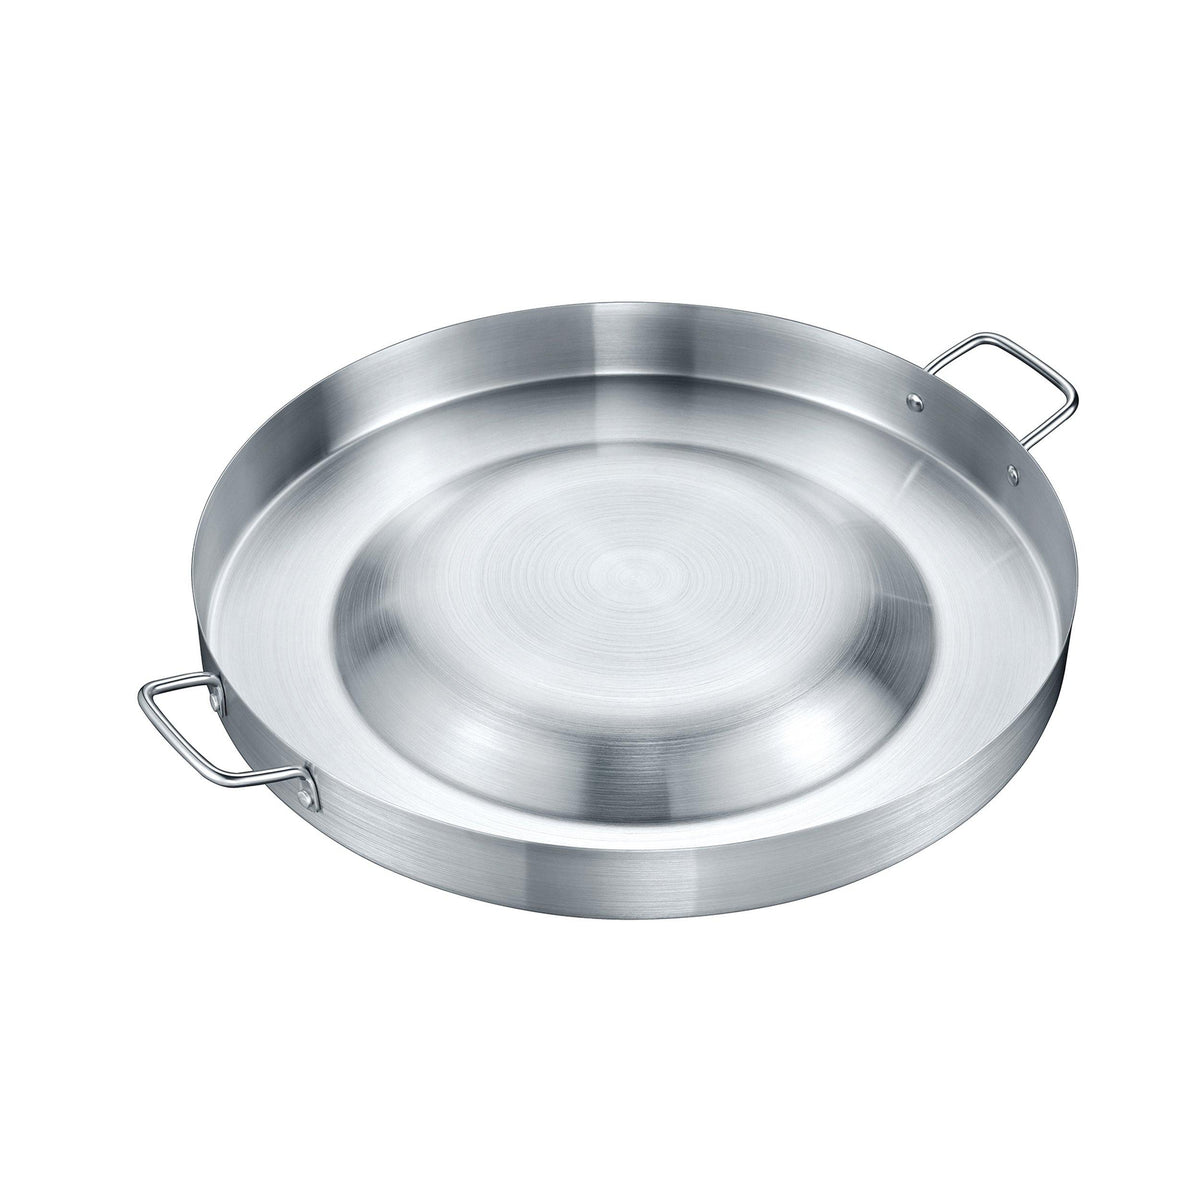 Concord Stainless Steel Comal Frying Bowl Cookware 22